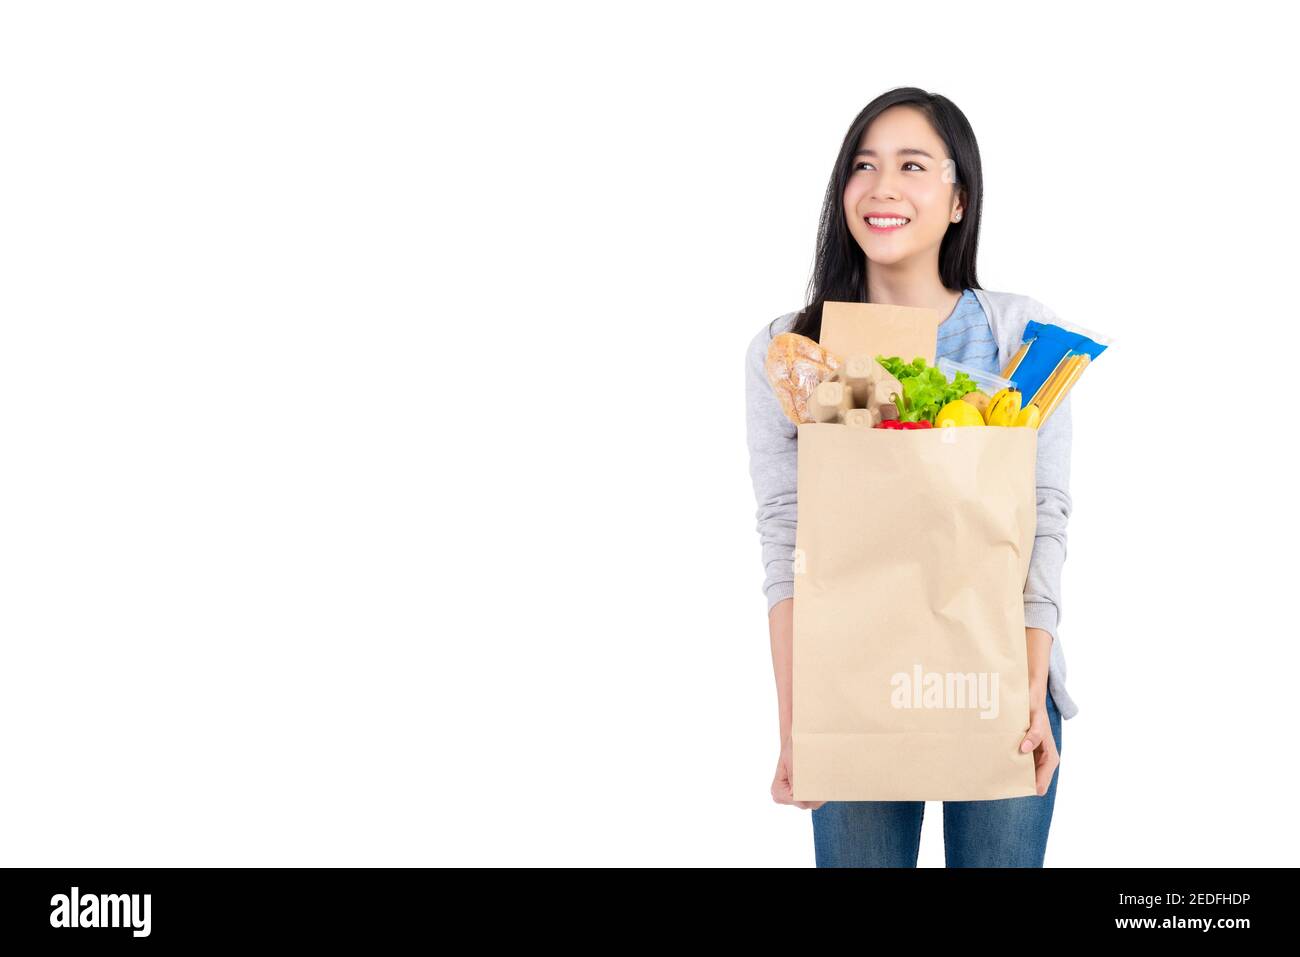 Beautiful Asian woman holding paper shopping bag full of vegetables and groceries looking at the space aside, studio shot isolated on white background Stock Photo